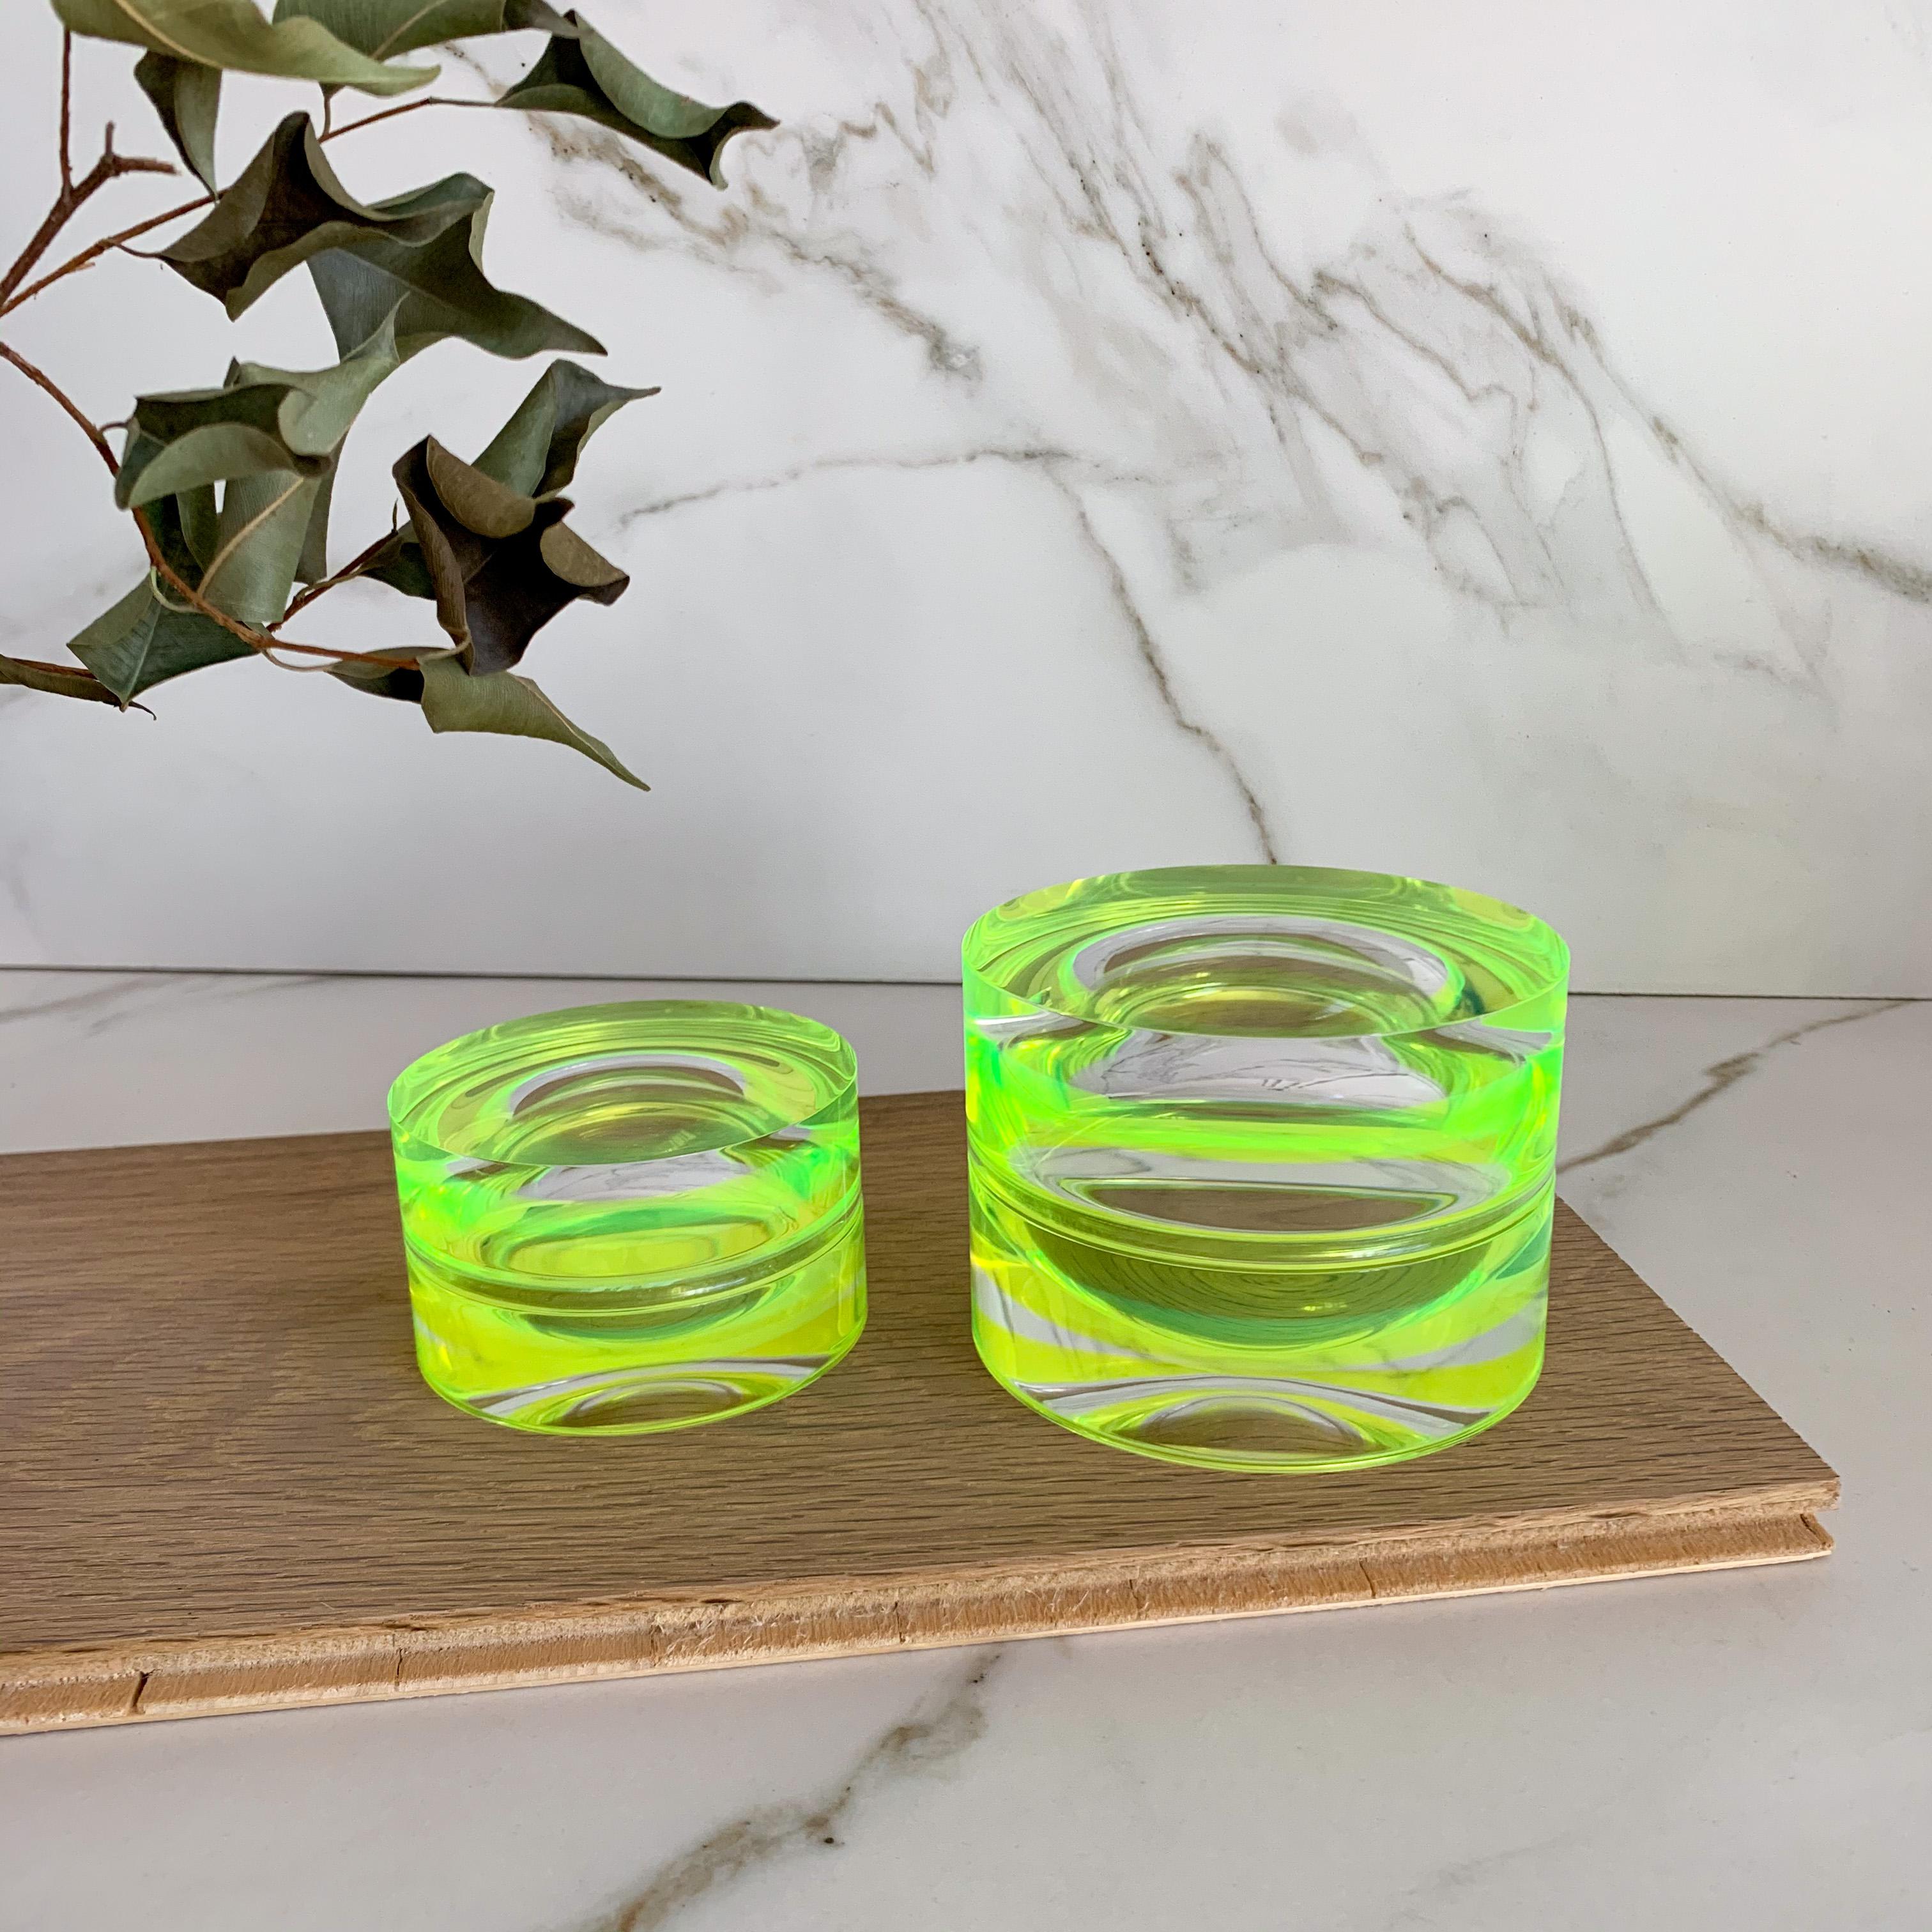 Modern, colorful and fun round box that can be used as a decorative element on a coffee table, desk or nightstand. Serving double duty as a storage box or as a candy bowl. 
They look beautiful when you pair the two available sizes.

Material: